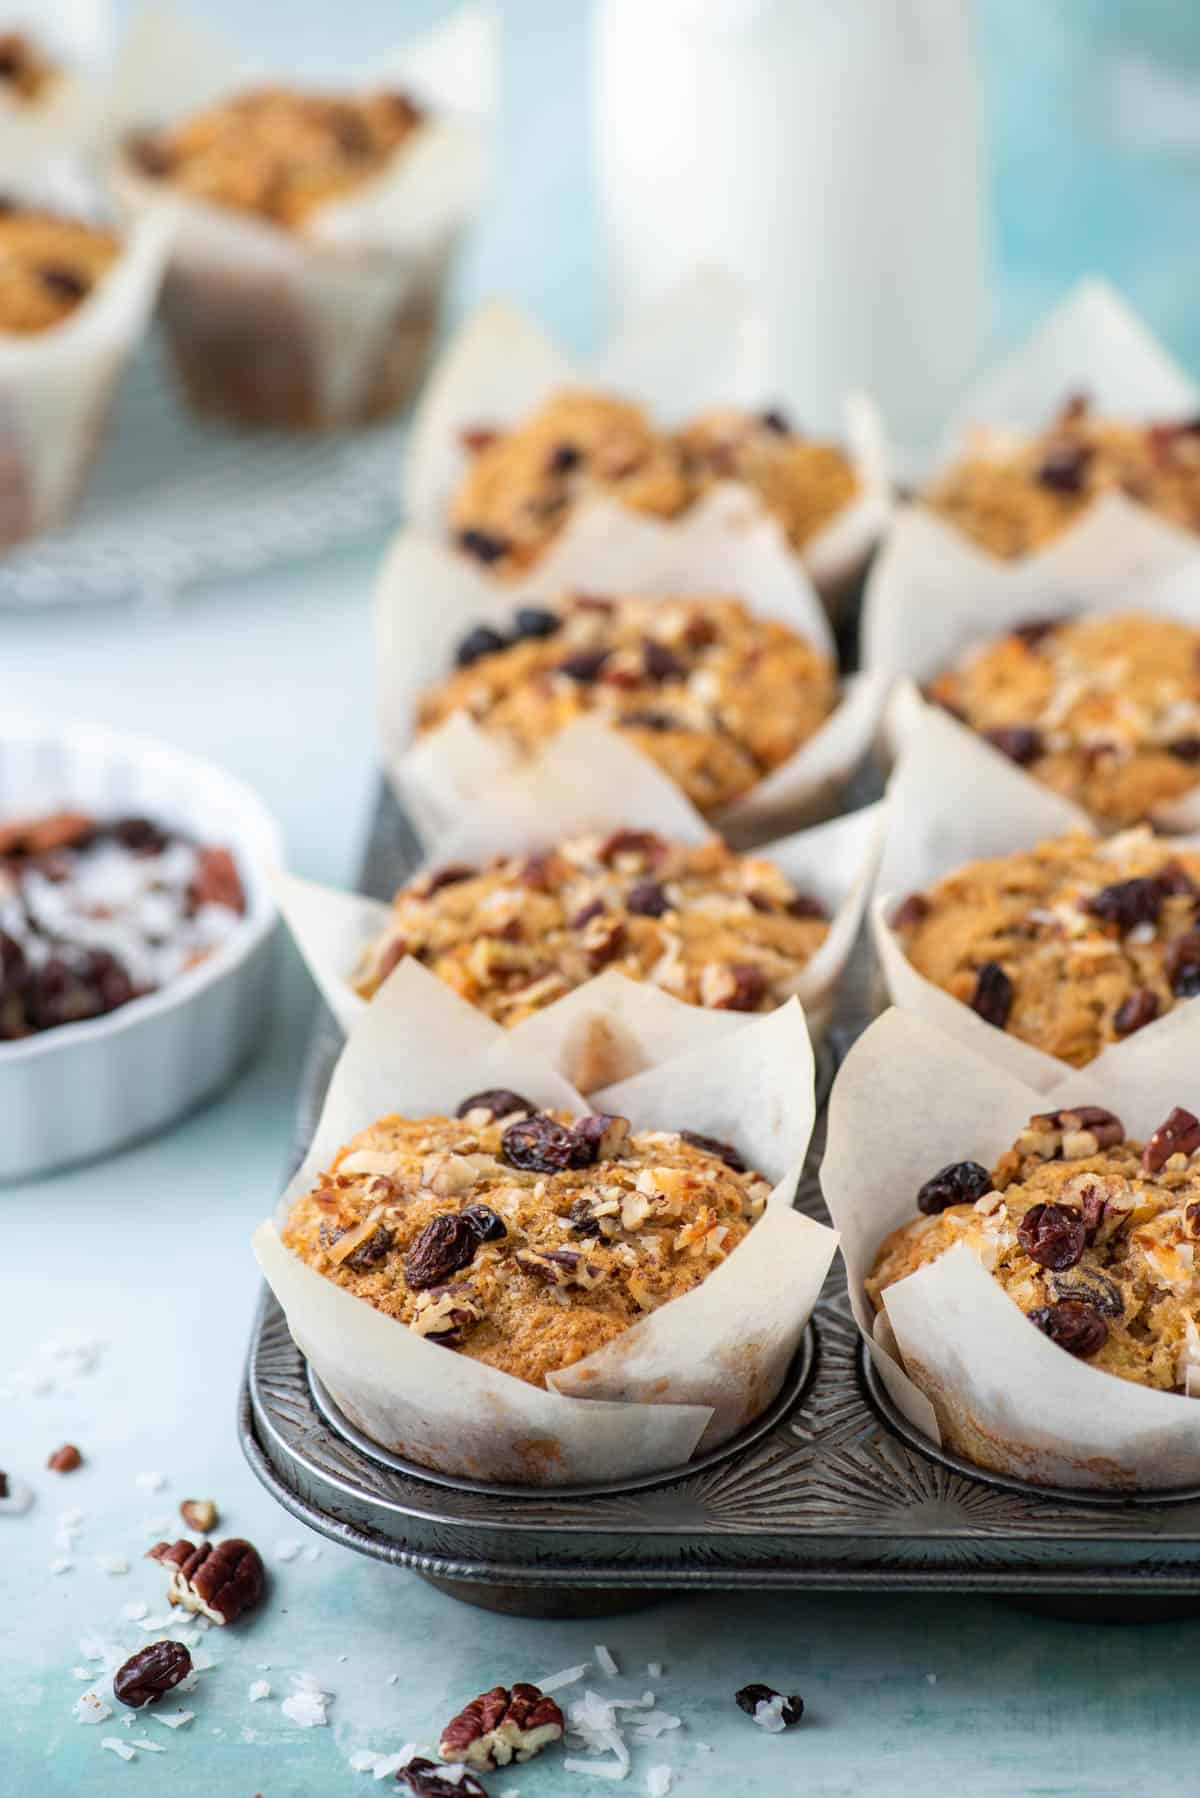 morning glory muffins in muffin liners inside a muffin pan surrounded by nuts, raisins and coconut shreds and more muffins in the background